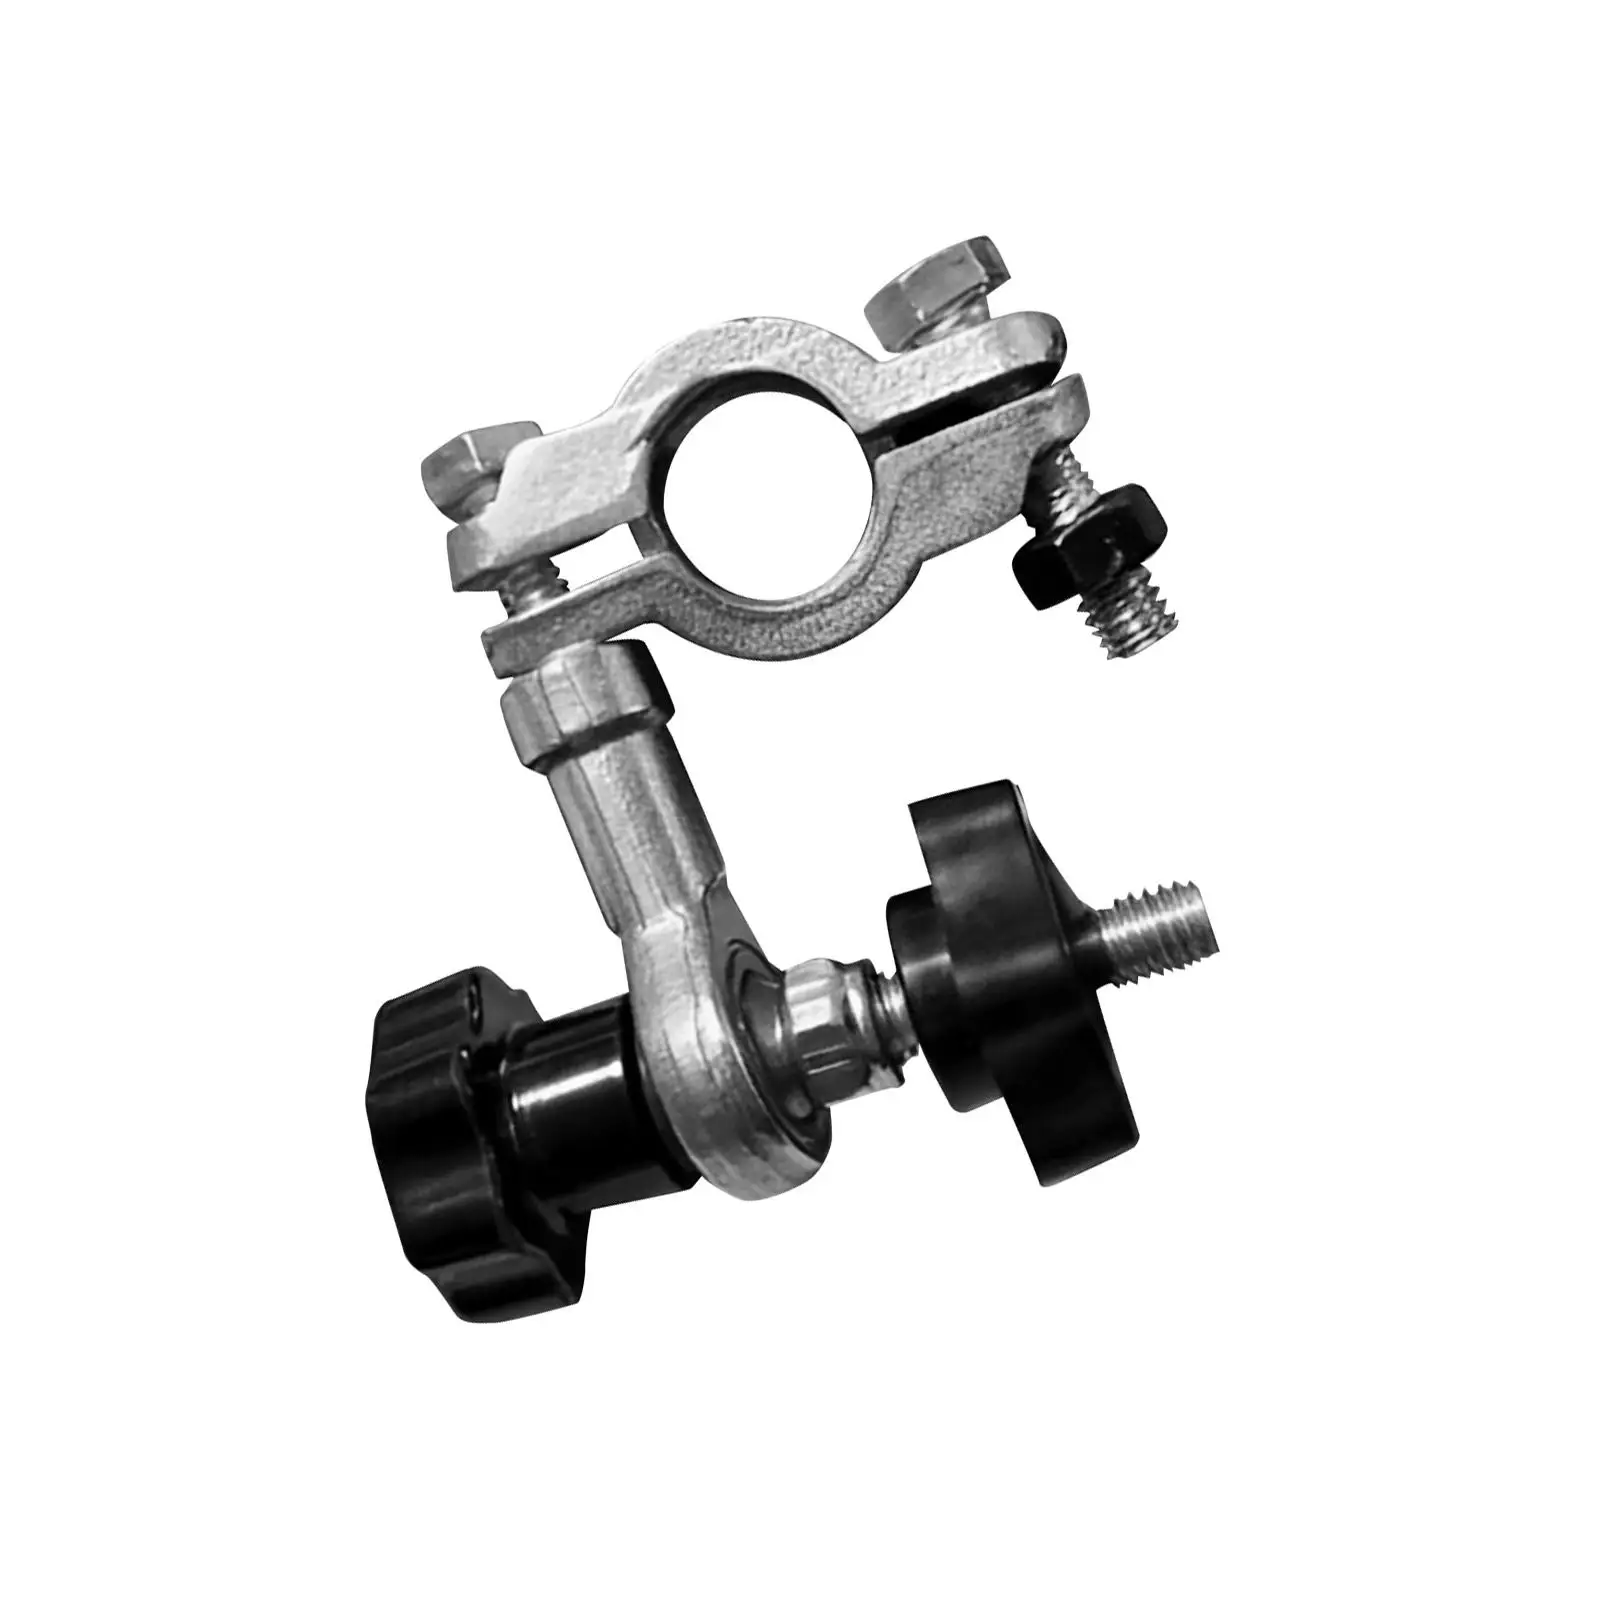 Bicycle Rear Trailer Connector Coupler Attachment Towing Solutions